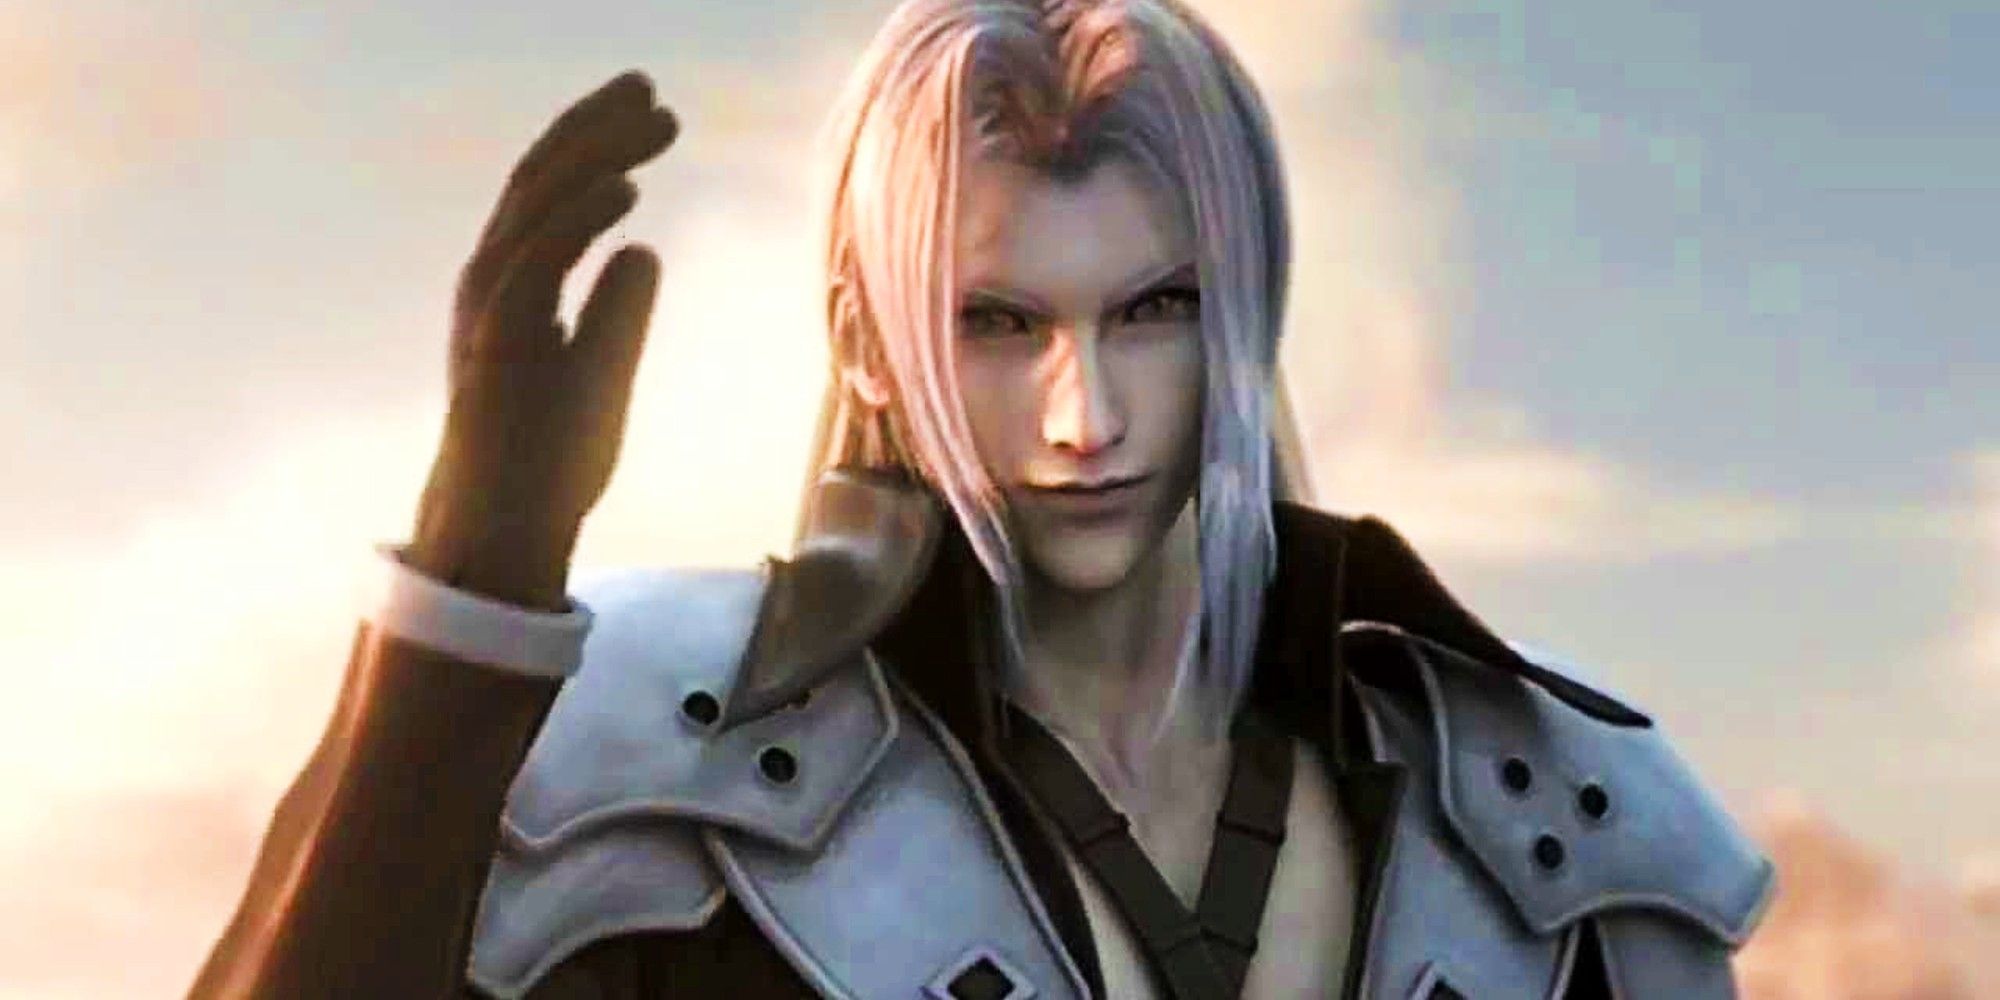 CCFF7 Sephiroth being creepy and friendly waving to camera